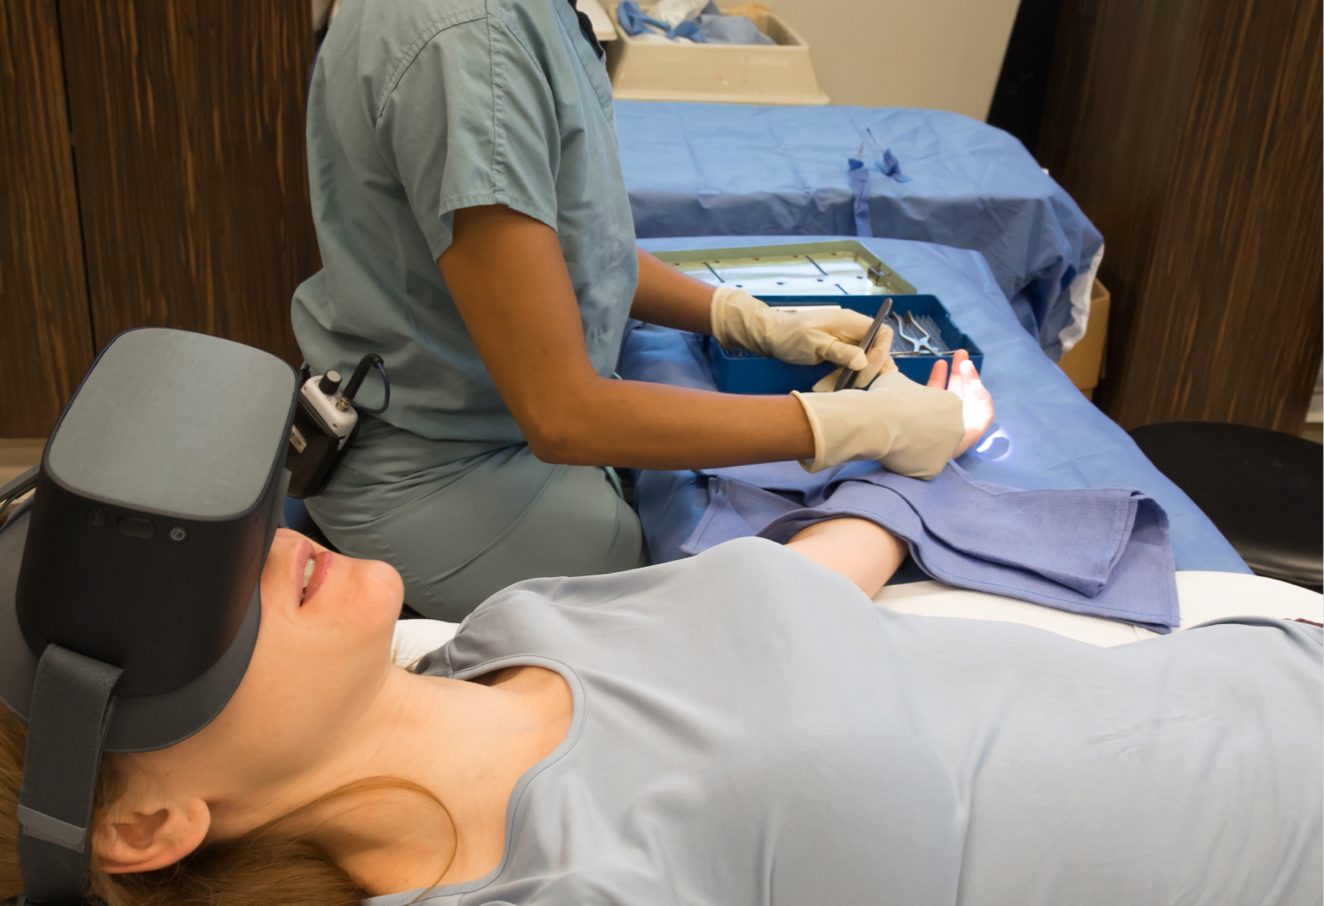 A woman wears a virtual reality headset while a doctor performs a procedure.